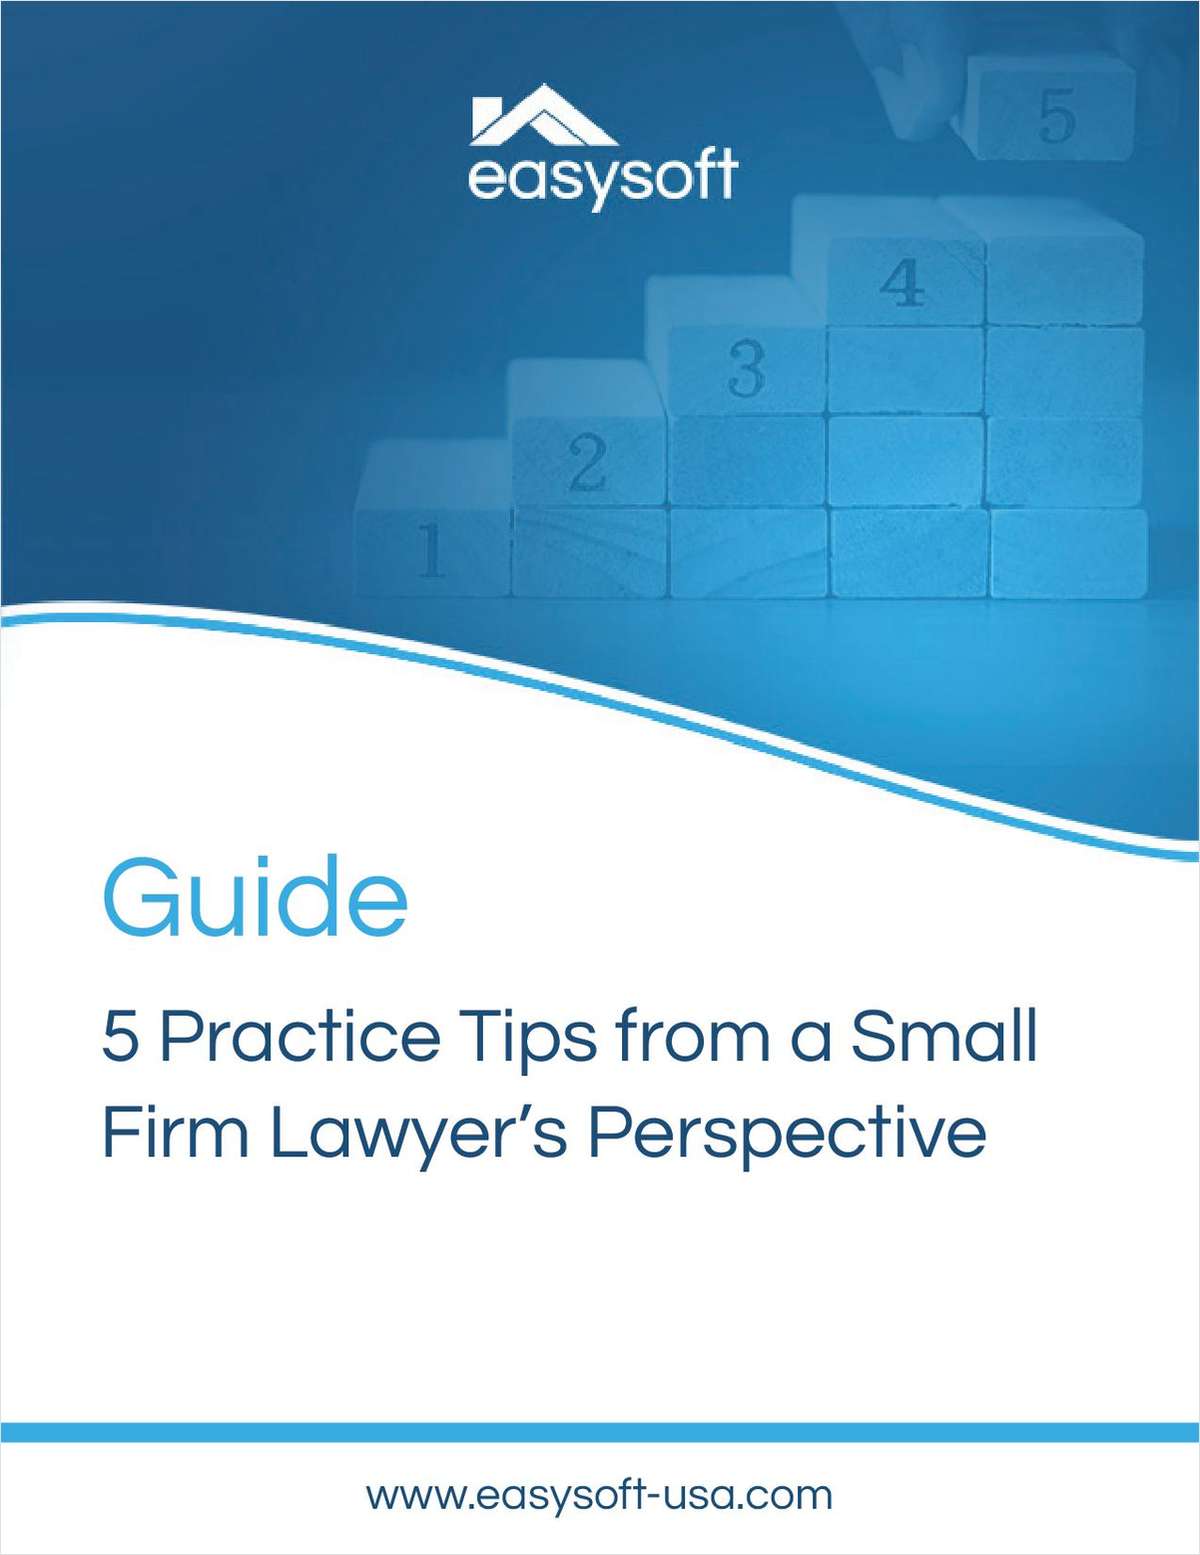 5 Practice Tips from a Small Firm Lawyer's Persepctive